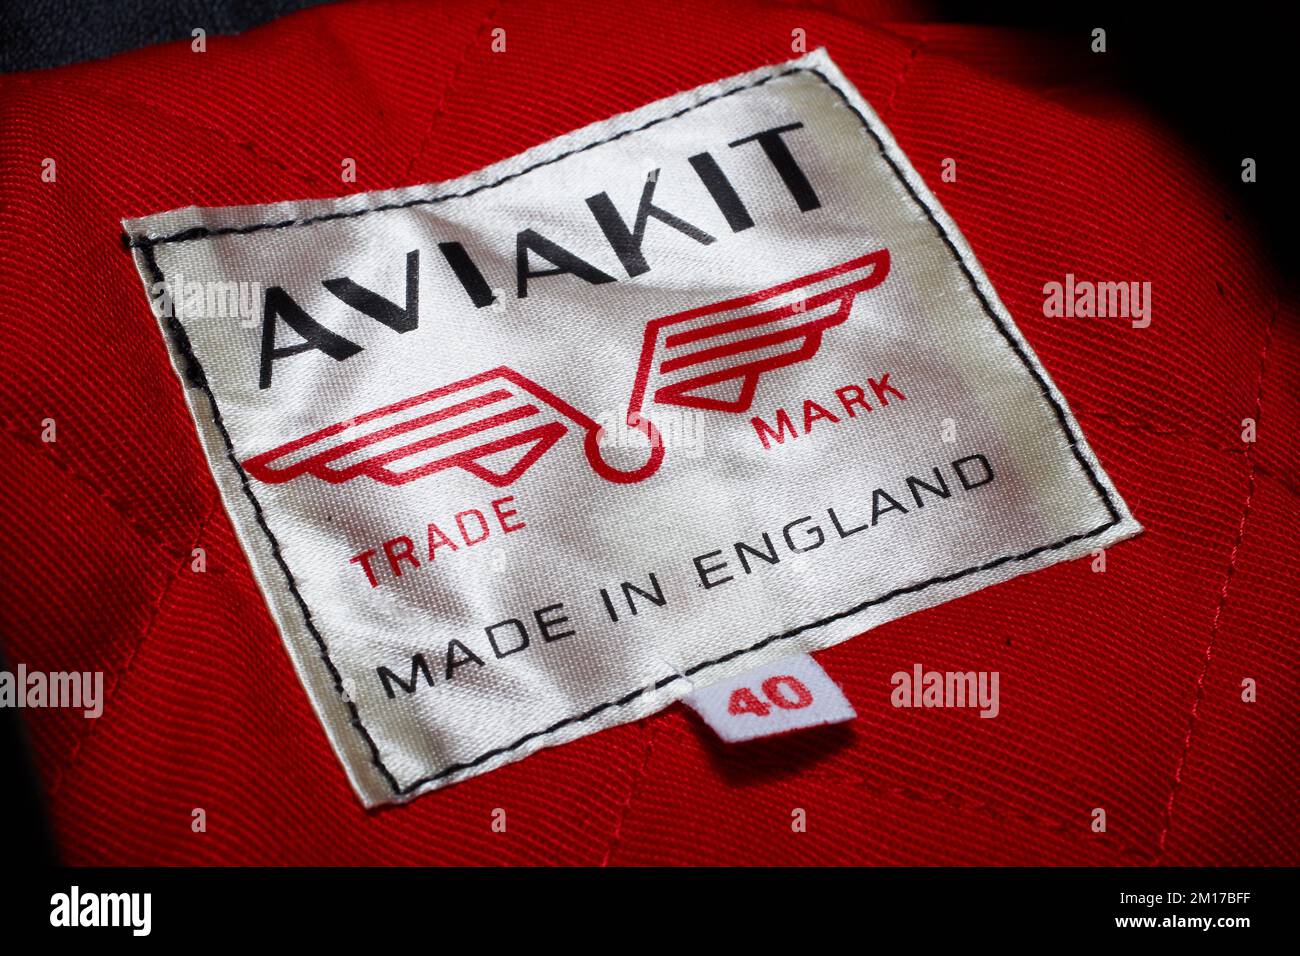 Aviakit label in a Lewis Leathers jacket. Stock Photo